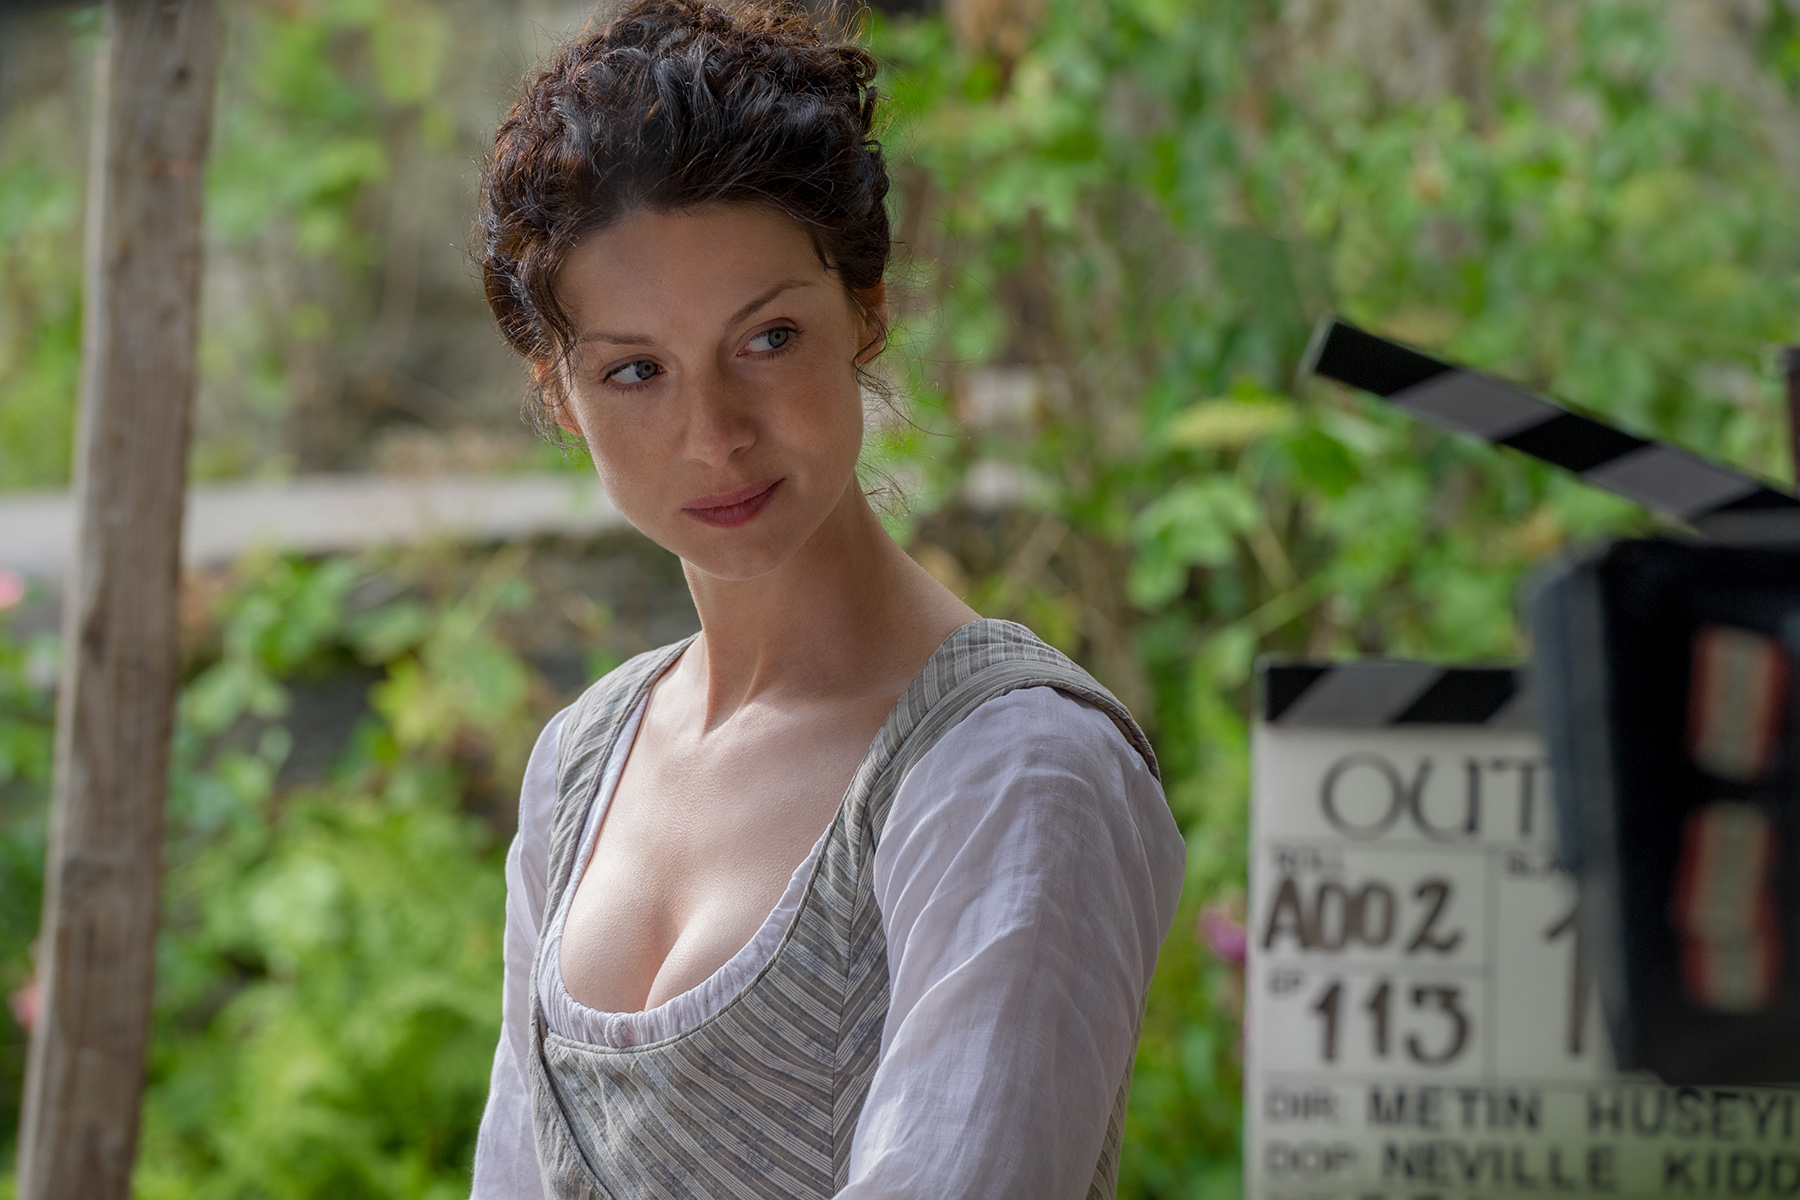 New official photos and clips for ‘Outlander’ Season 1B